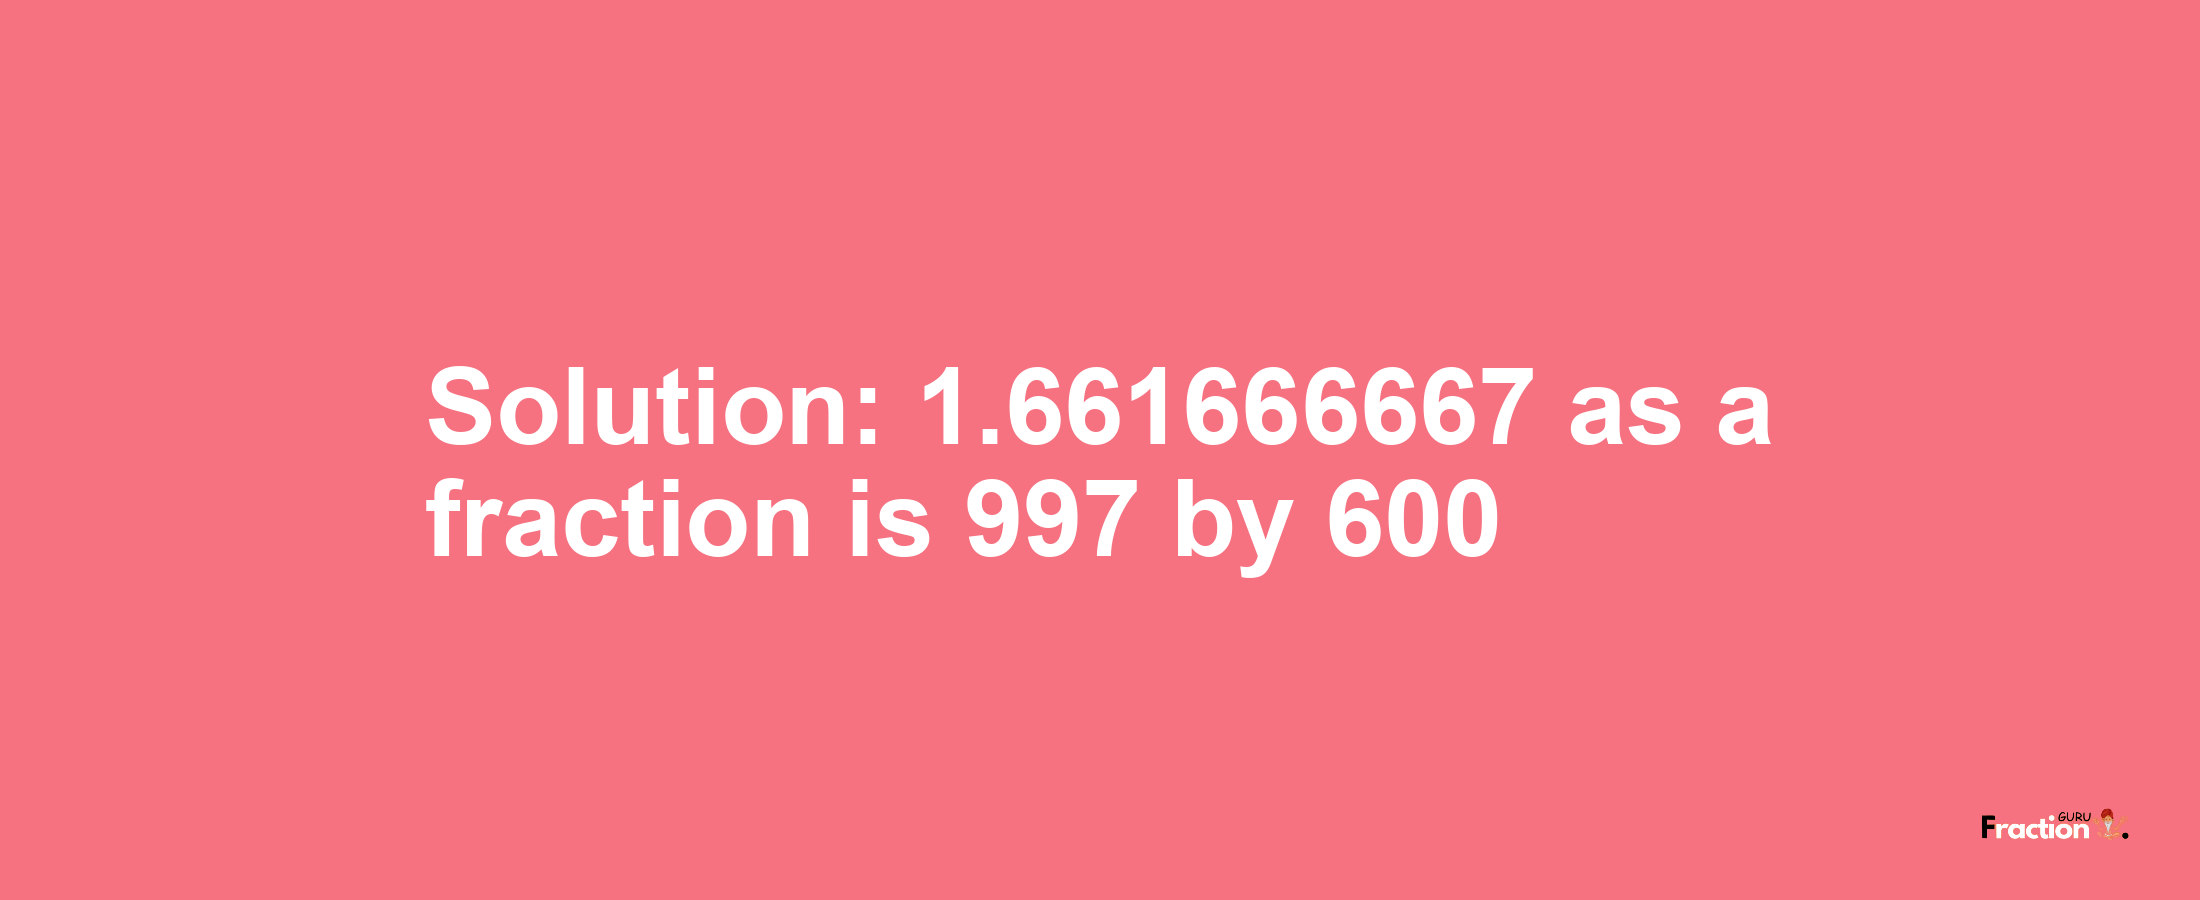 Solution:1.661666667 as a fraction is 997/600